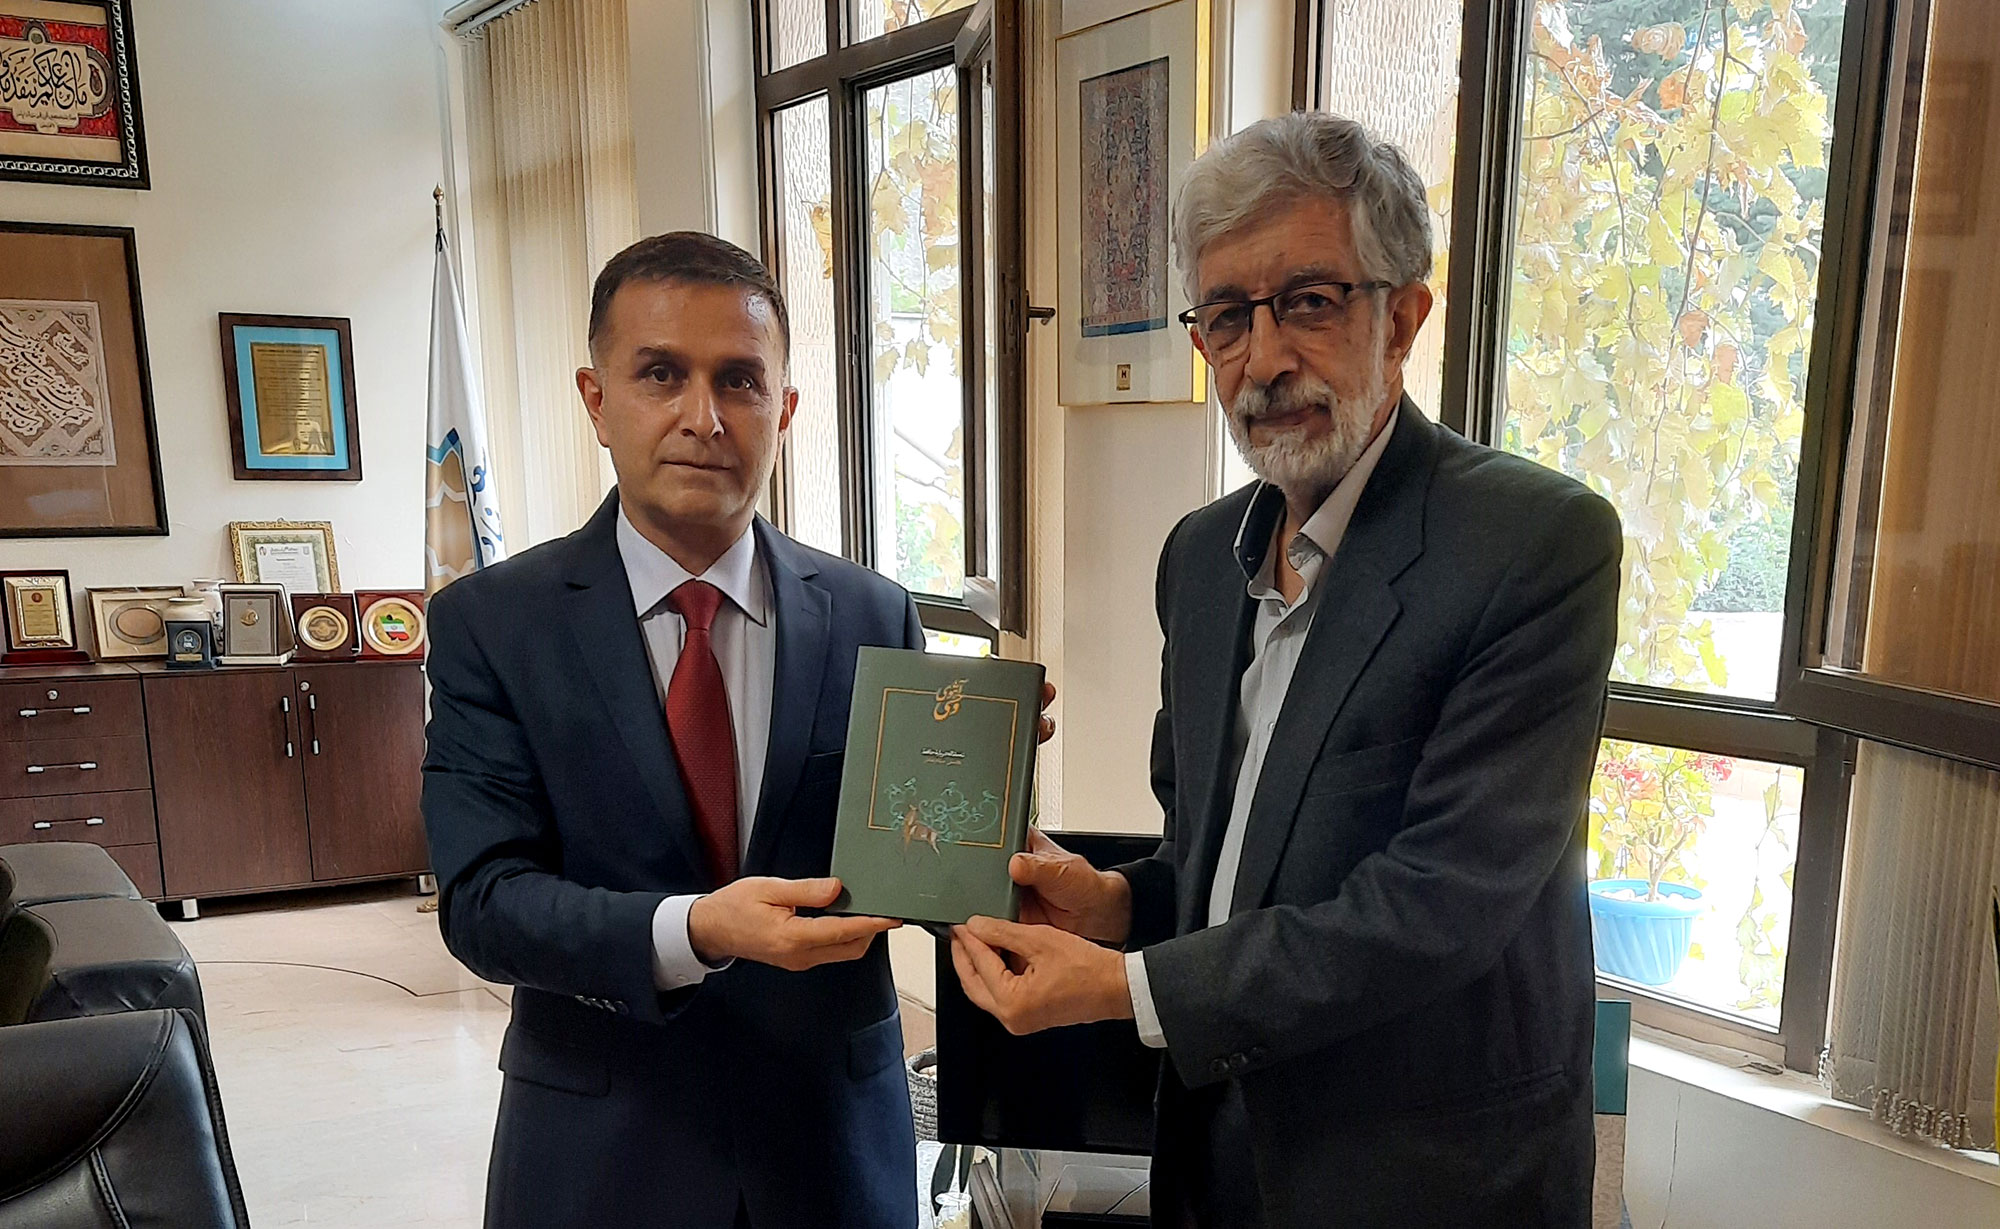 ECI President meets with the head of the Saadi Foundation